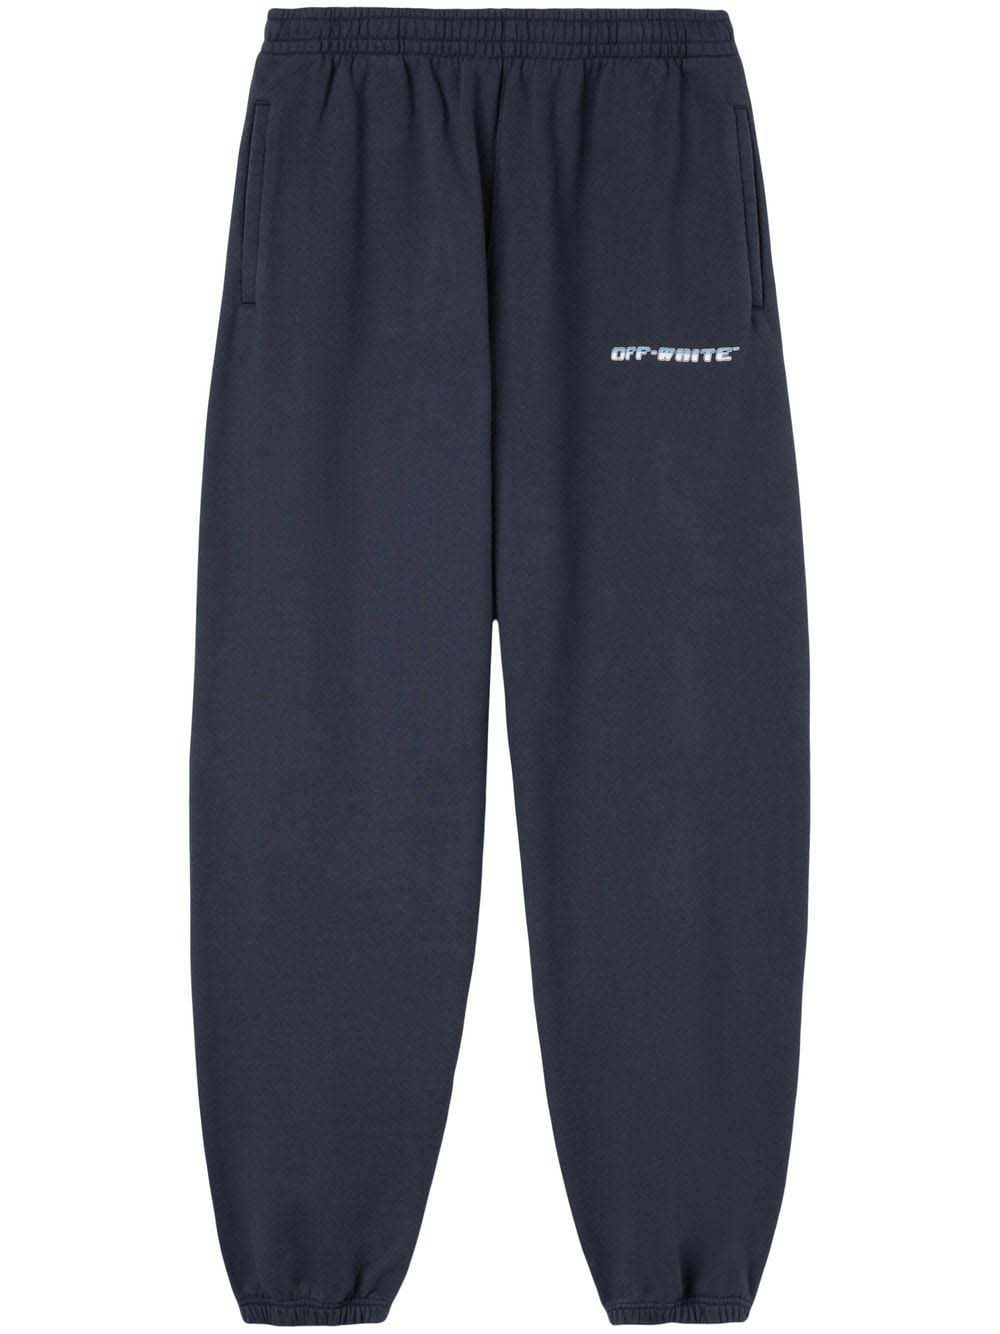 OFF-WHITE Between Arrow Slim Sweatpants Outerspace/White